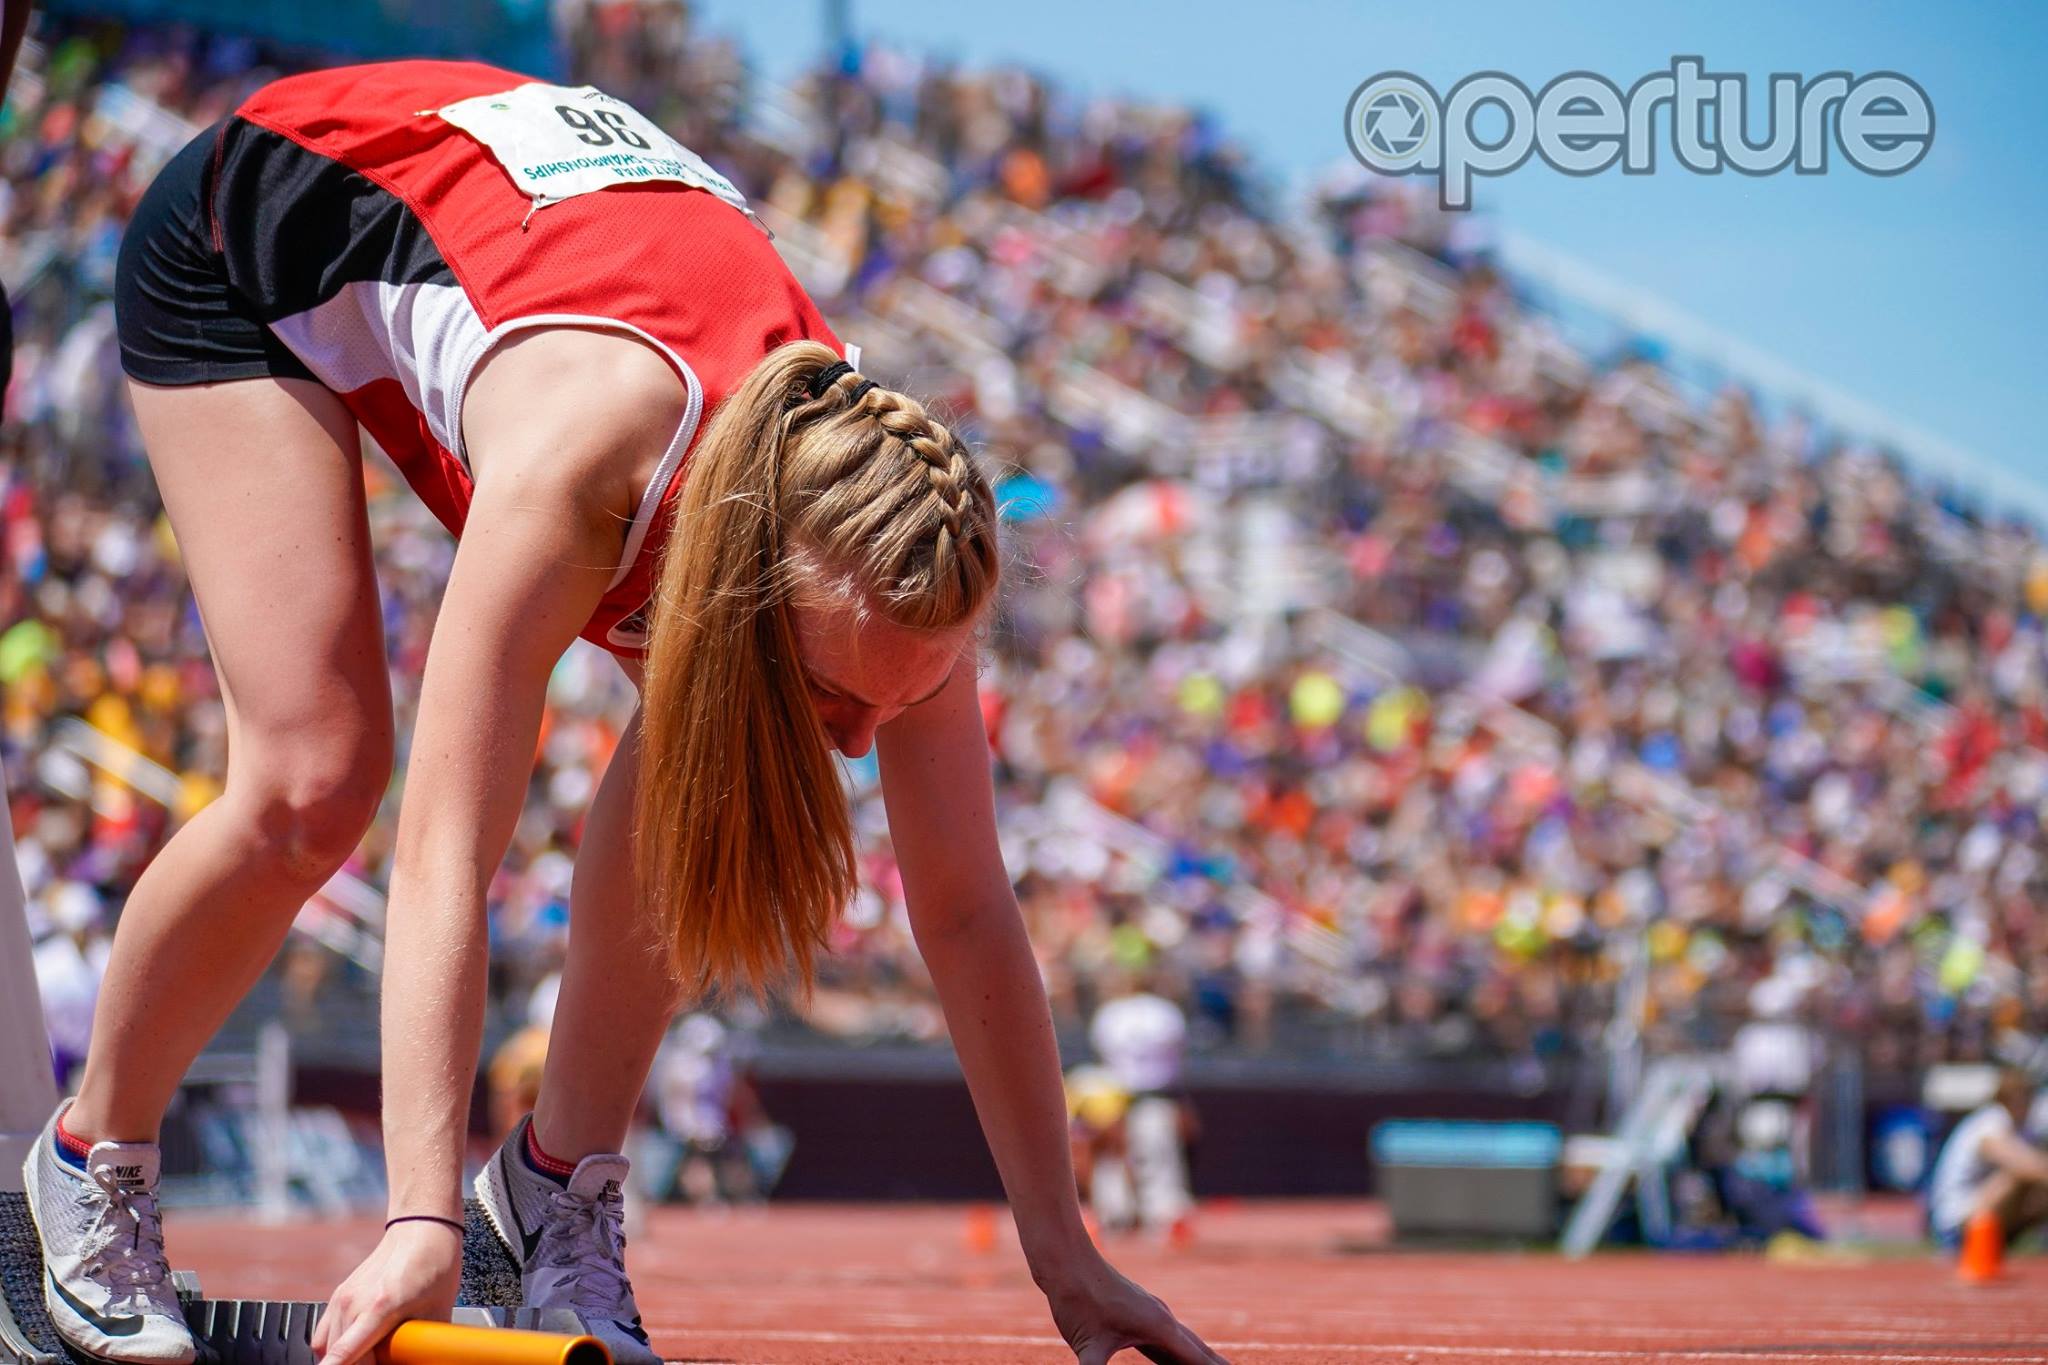 Here’s a list of area athletes taking part in today’s WIAA state track and field meet at UW-La Crosse